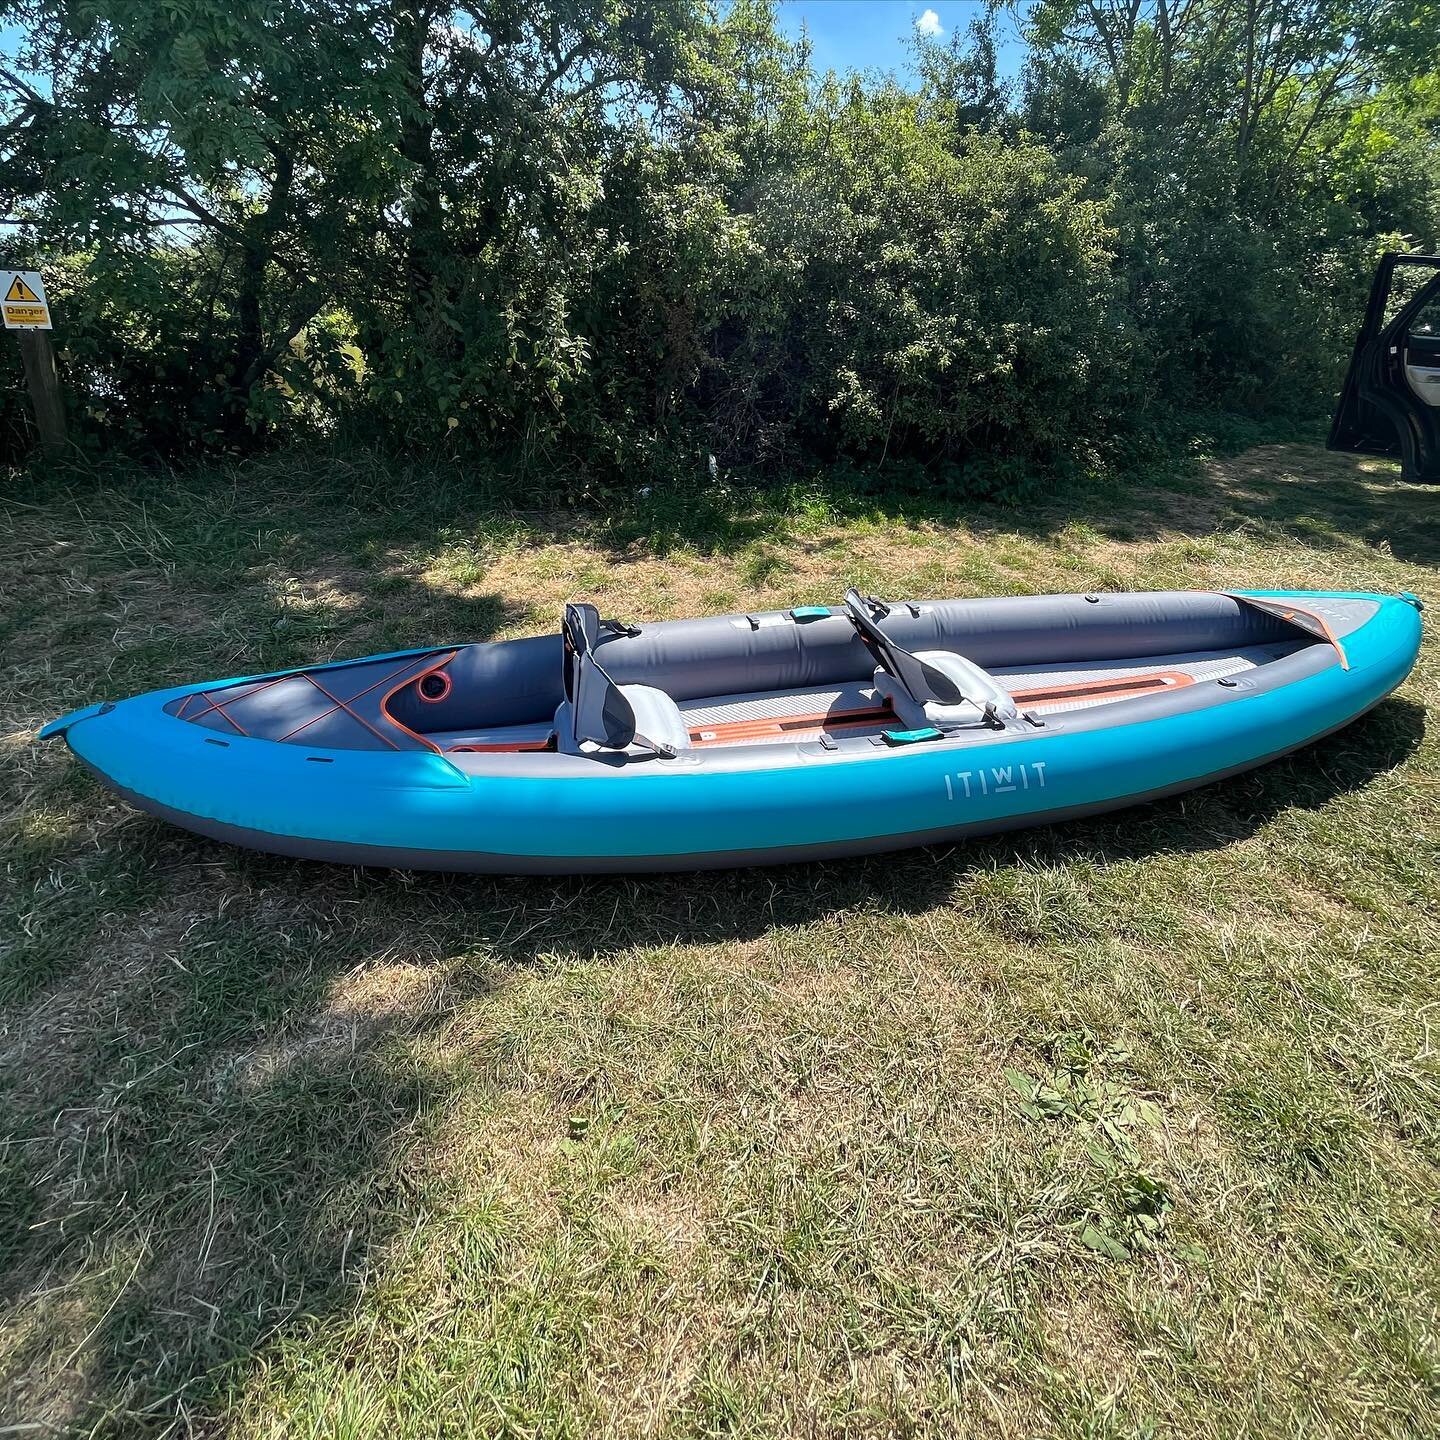 New Kayak, can't wait to get this on the water.

Who's going first 🙋&zwj;♂️

Available to book online.